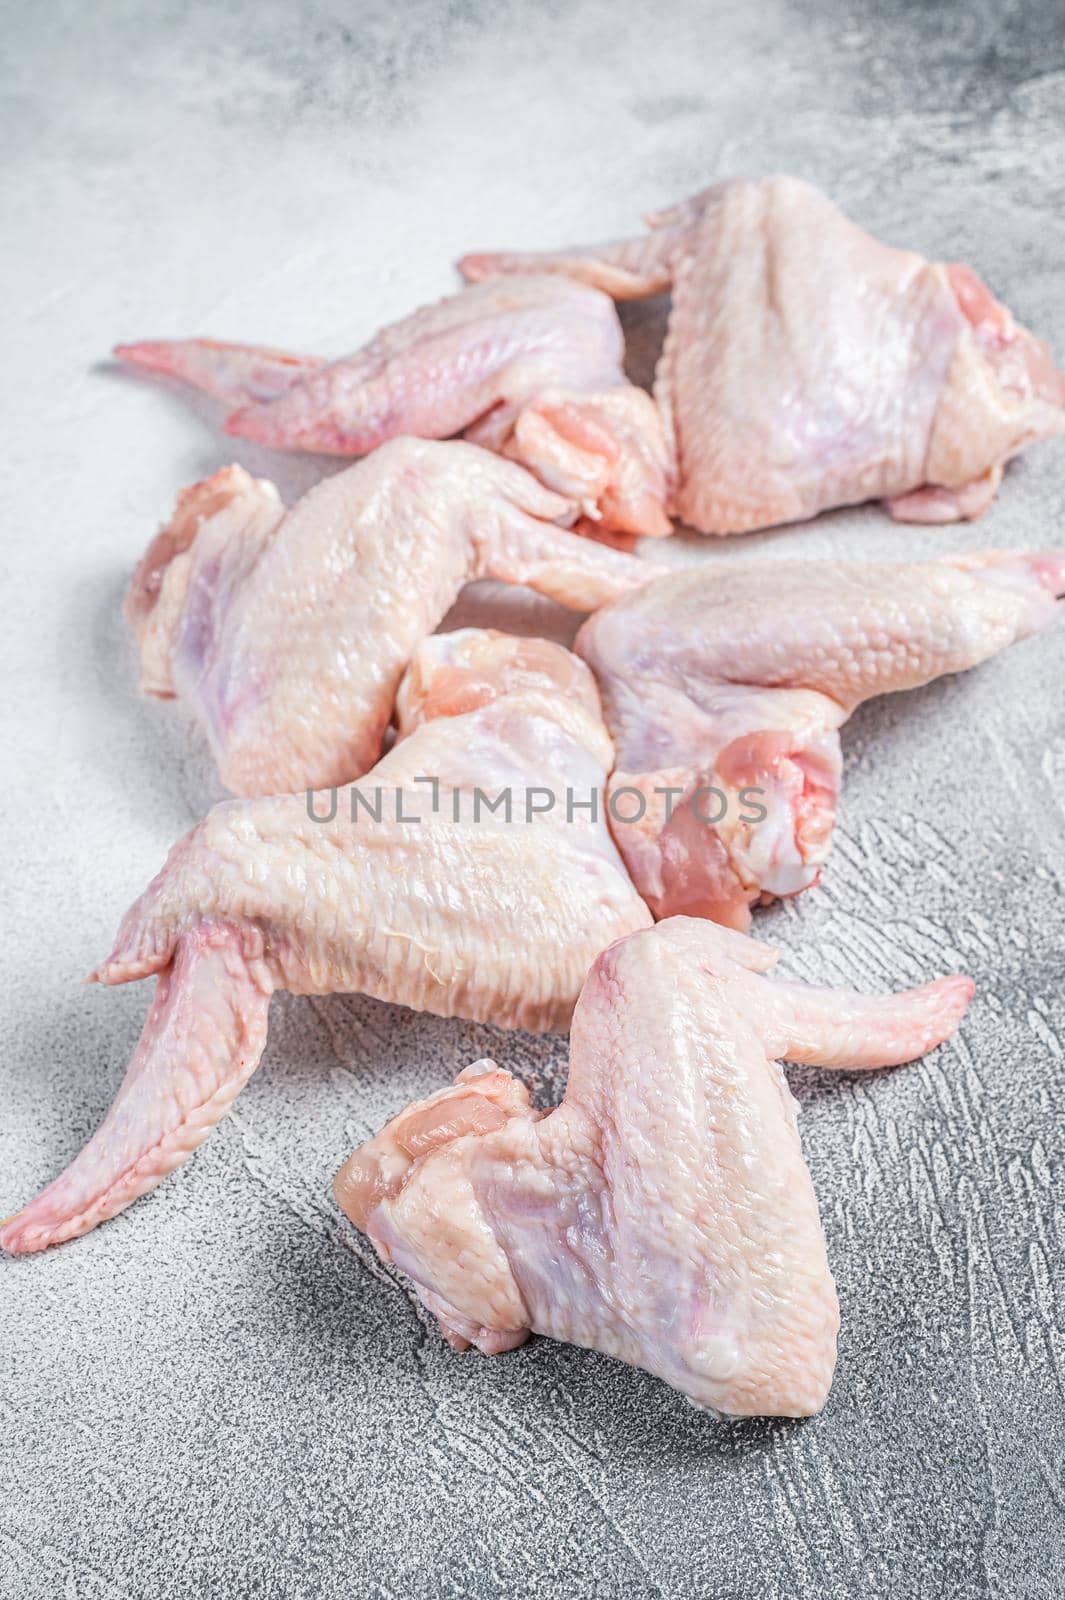 Raw chicken wings on a kitchen table. White background. Top view.